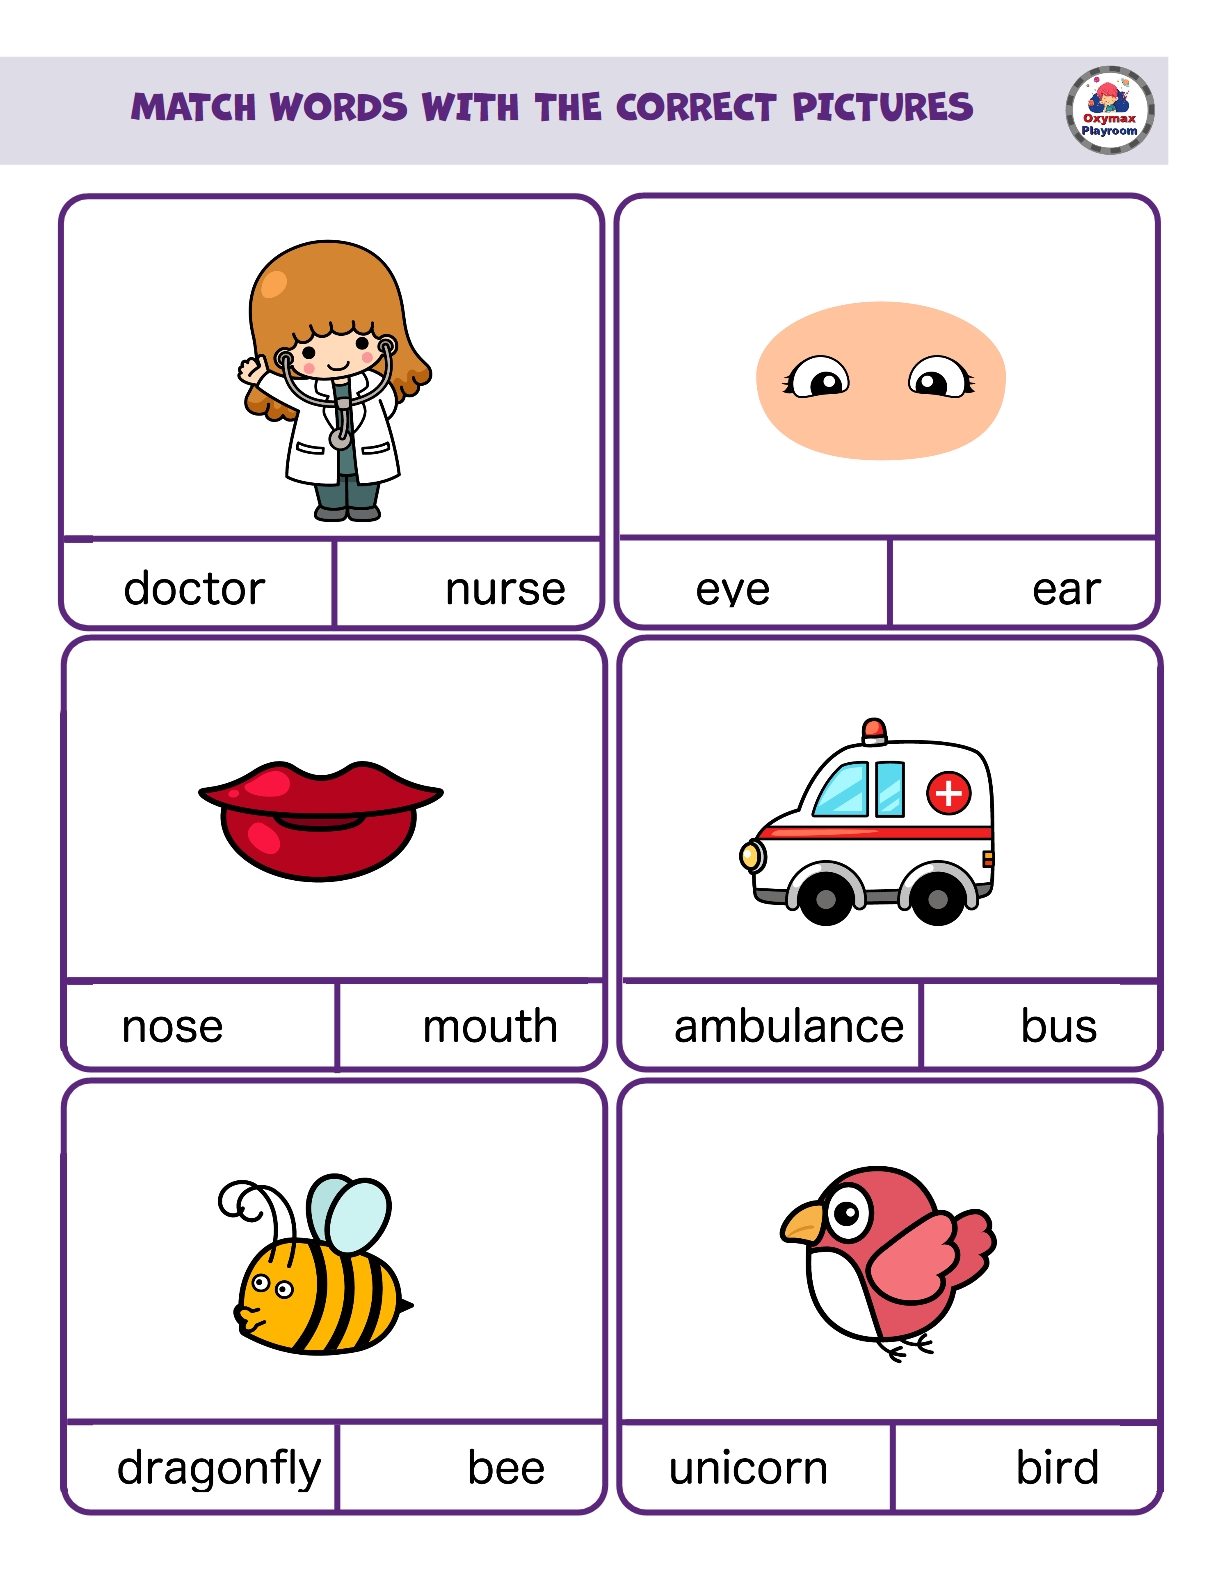 Free Educational Games For Kids. MATCH WORDS WITH THE CORRECT PICTURES. 72 game cards